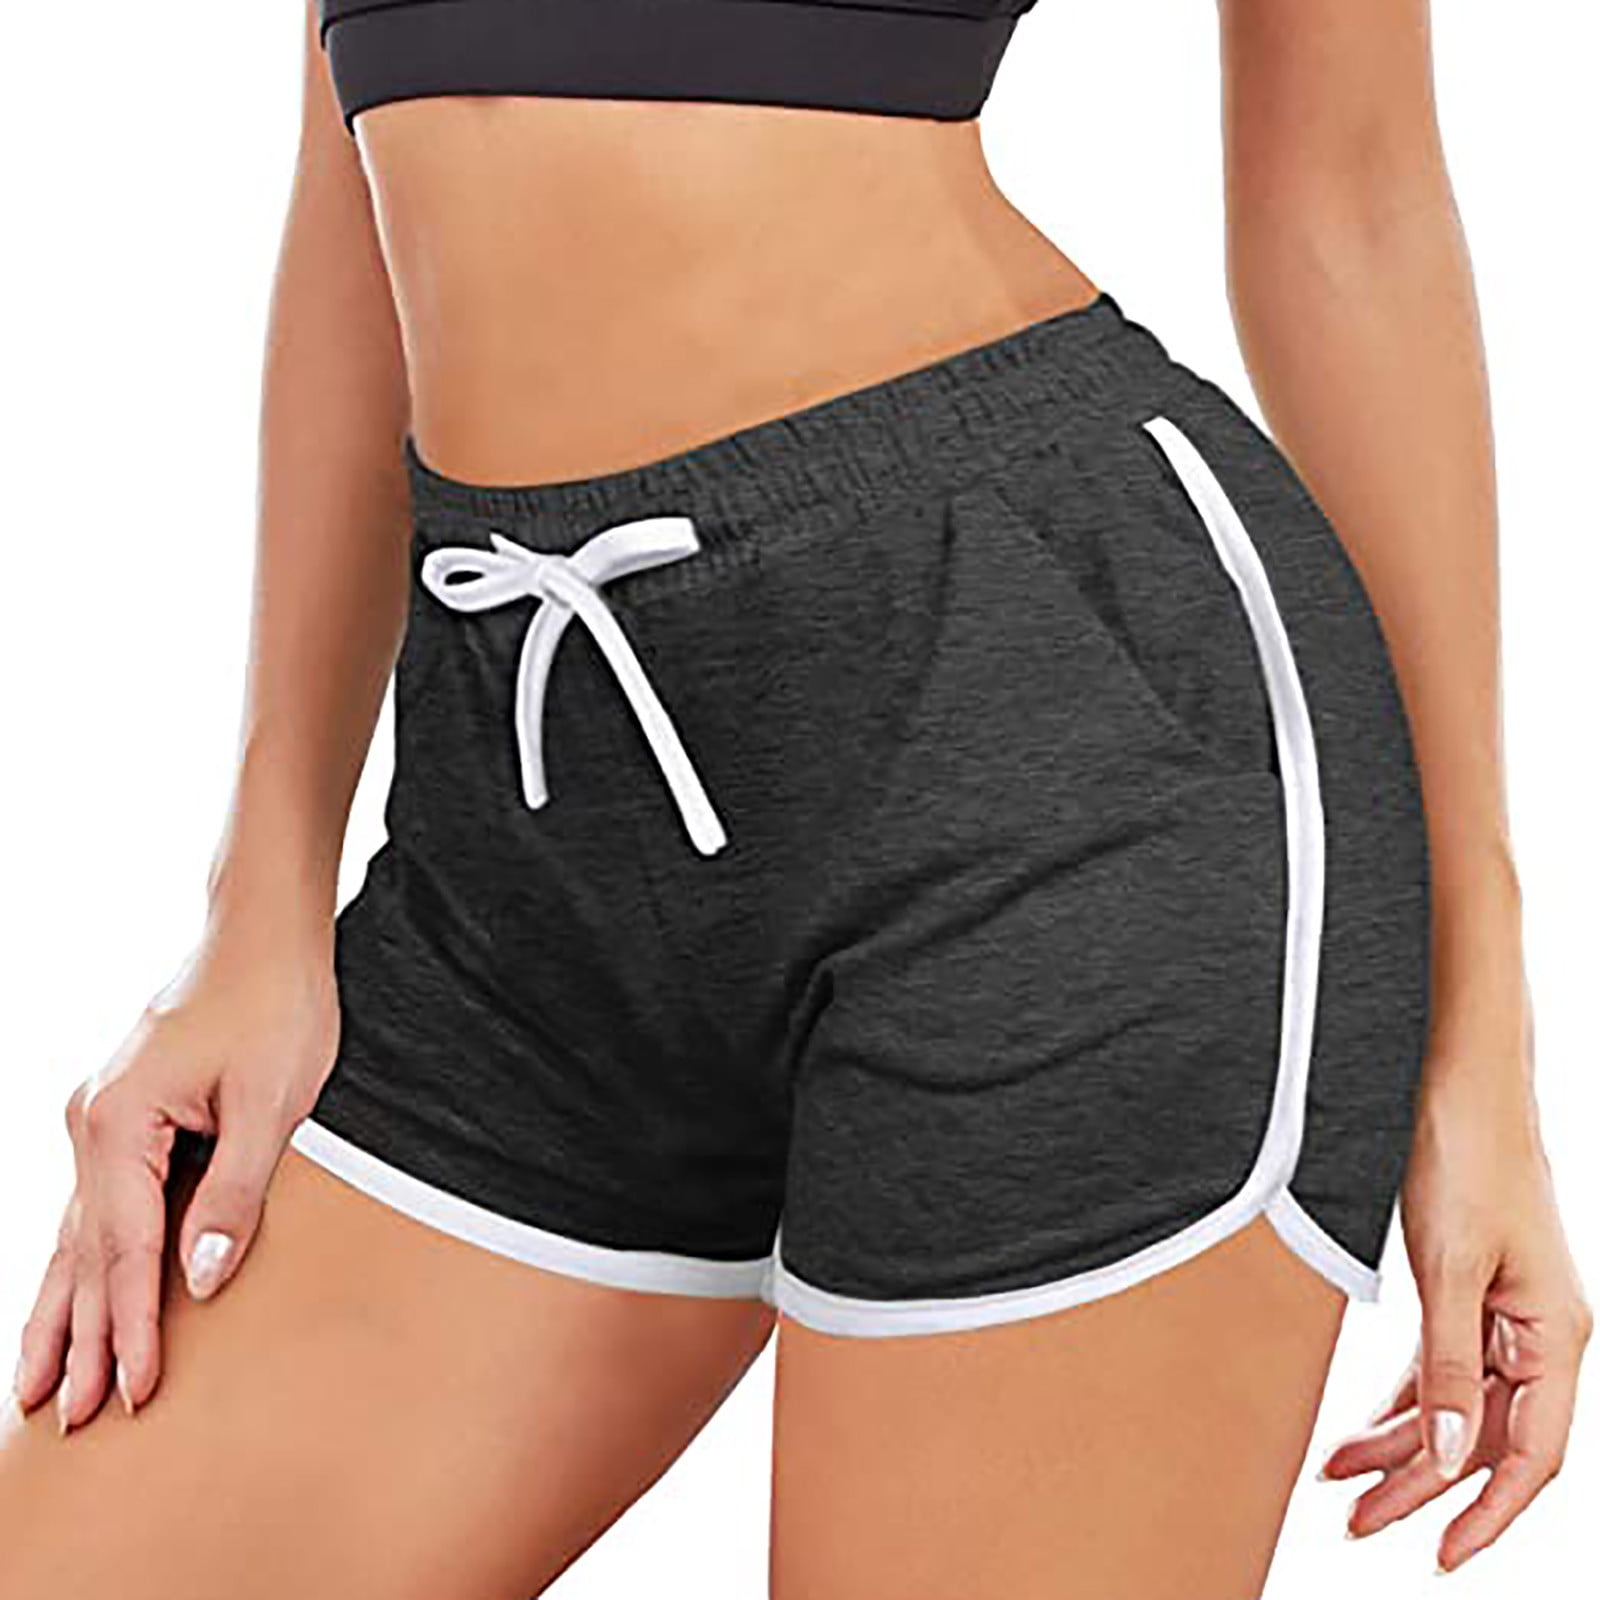 Toflowytour Athletic Underwear Shorts for Women Gym Yoga Workout Teen Girls Booty  Boyshorts Panties Boxer Briefs Summer Clothes(Xs, Black) at  Women's  Clothing store